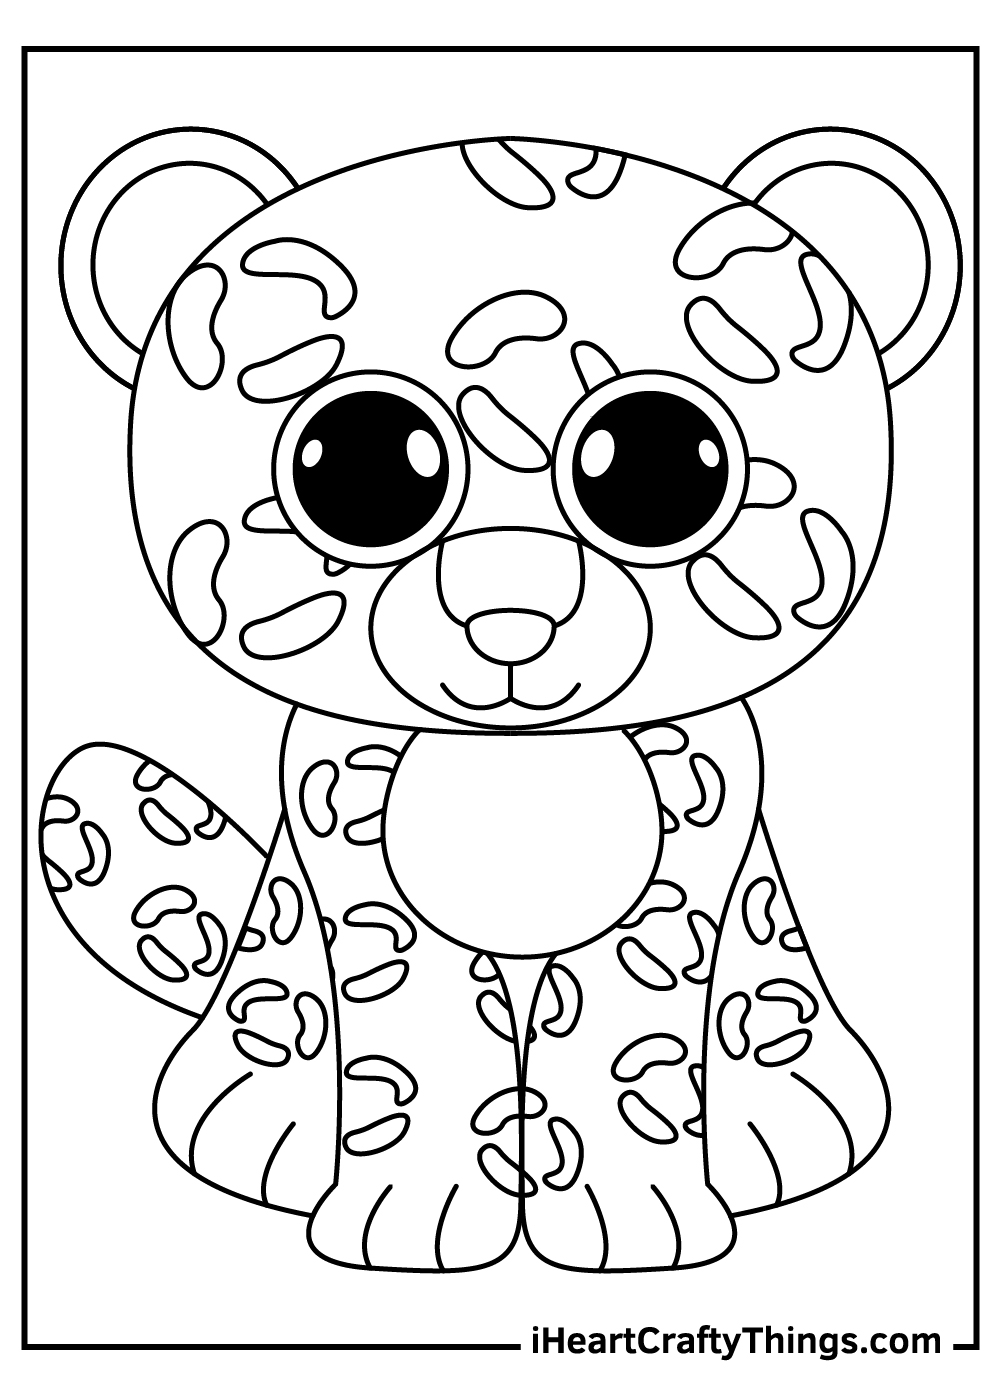 Beanie boos coloring pages free printables